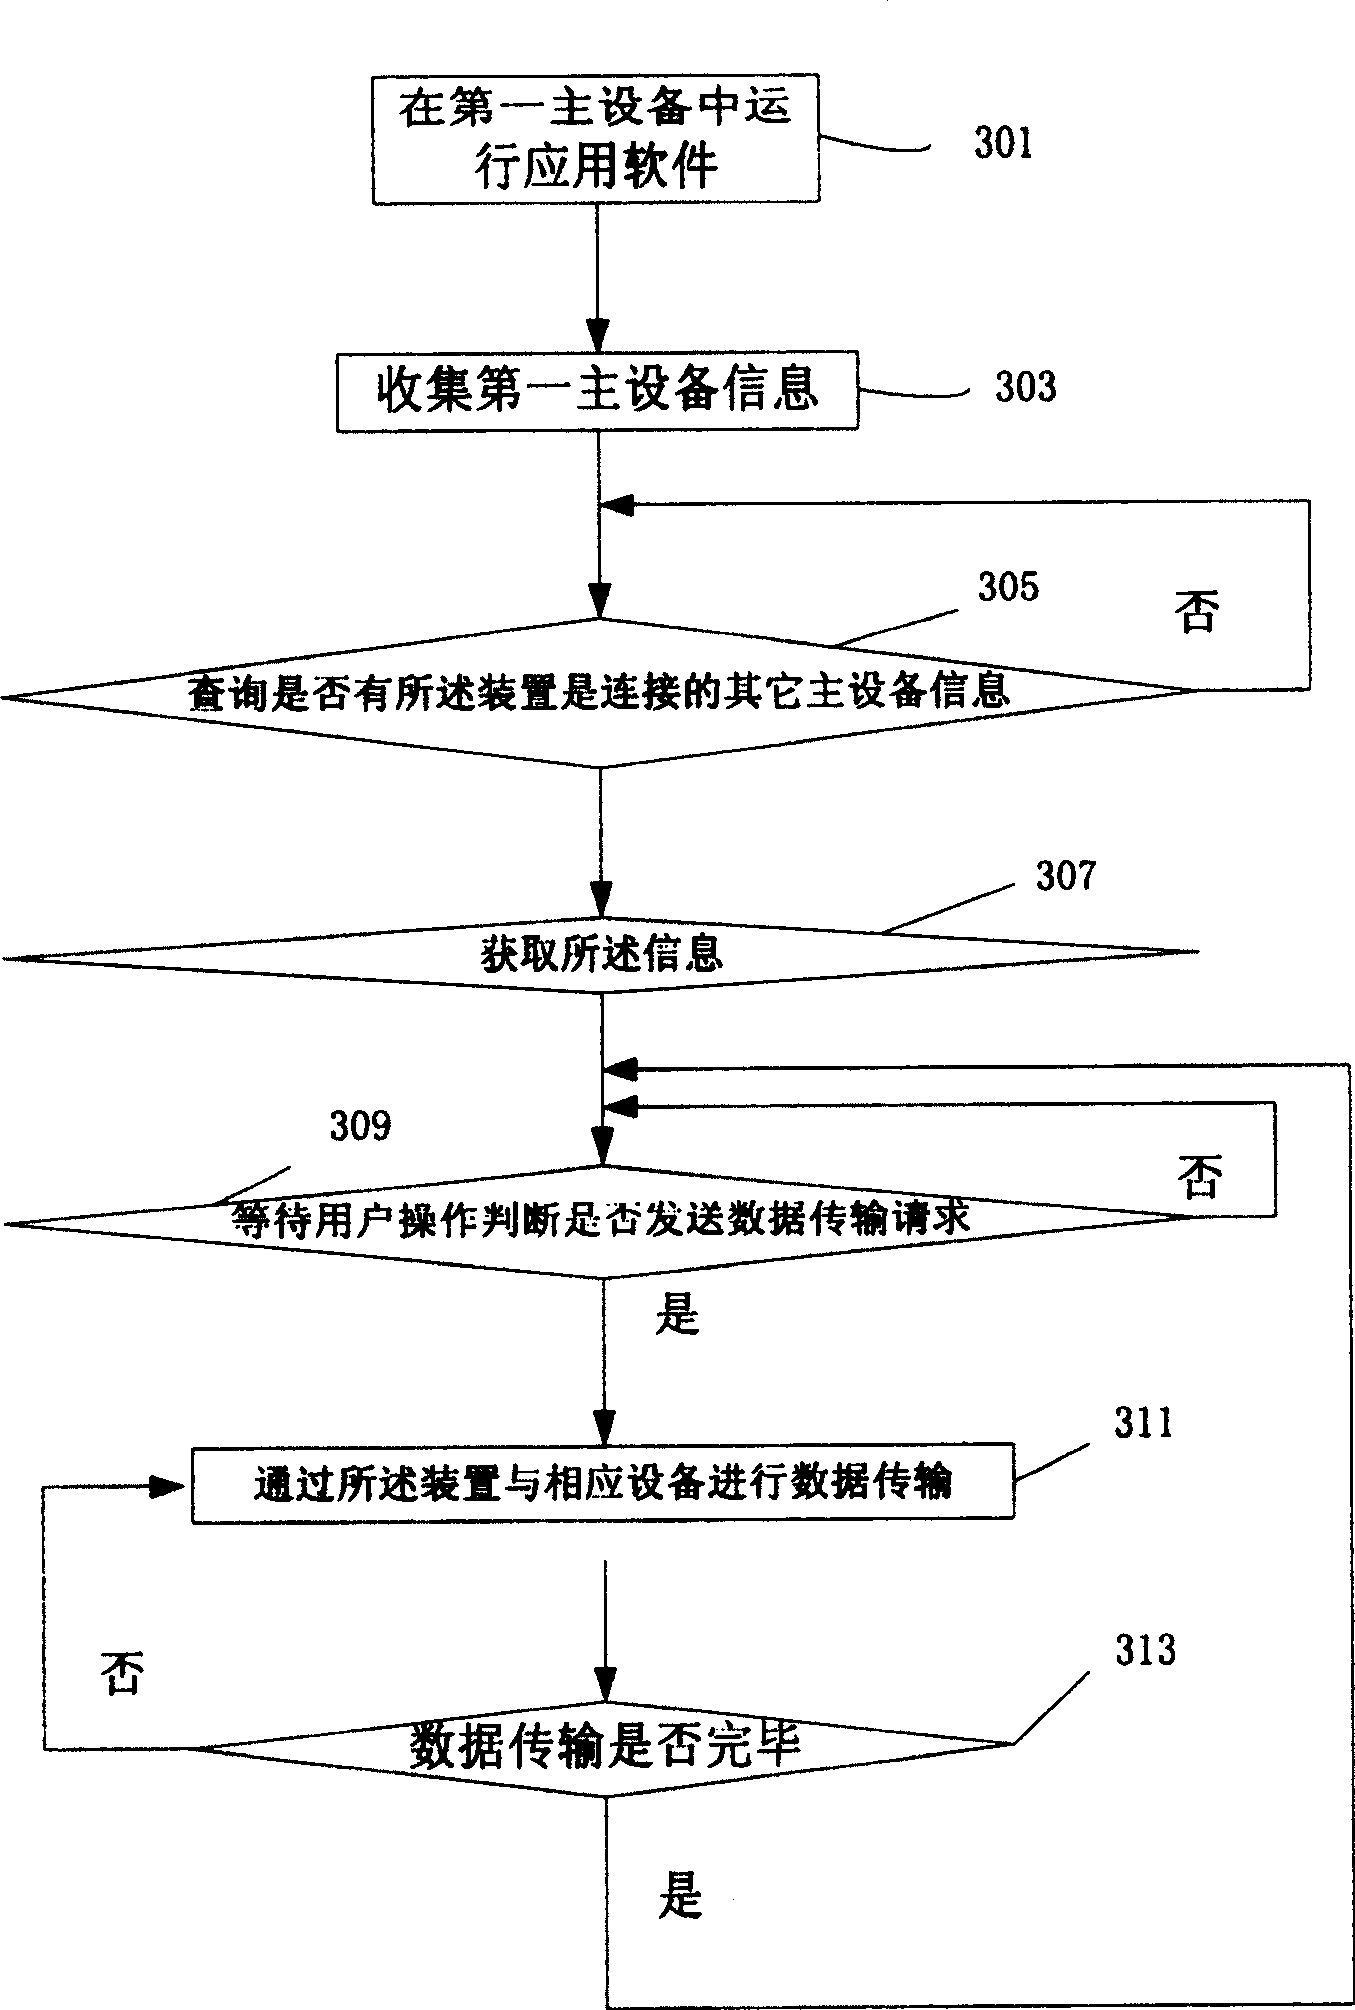 Equipment, method and system for realizing equipment interconnection